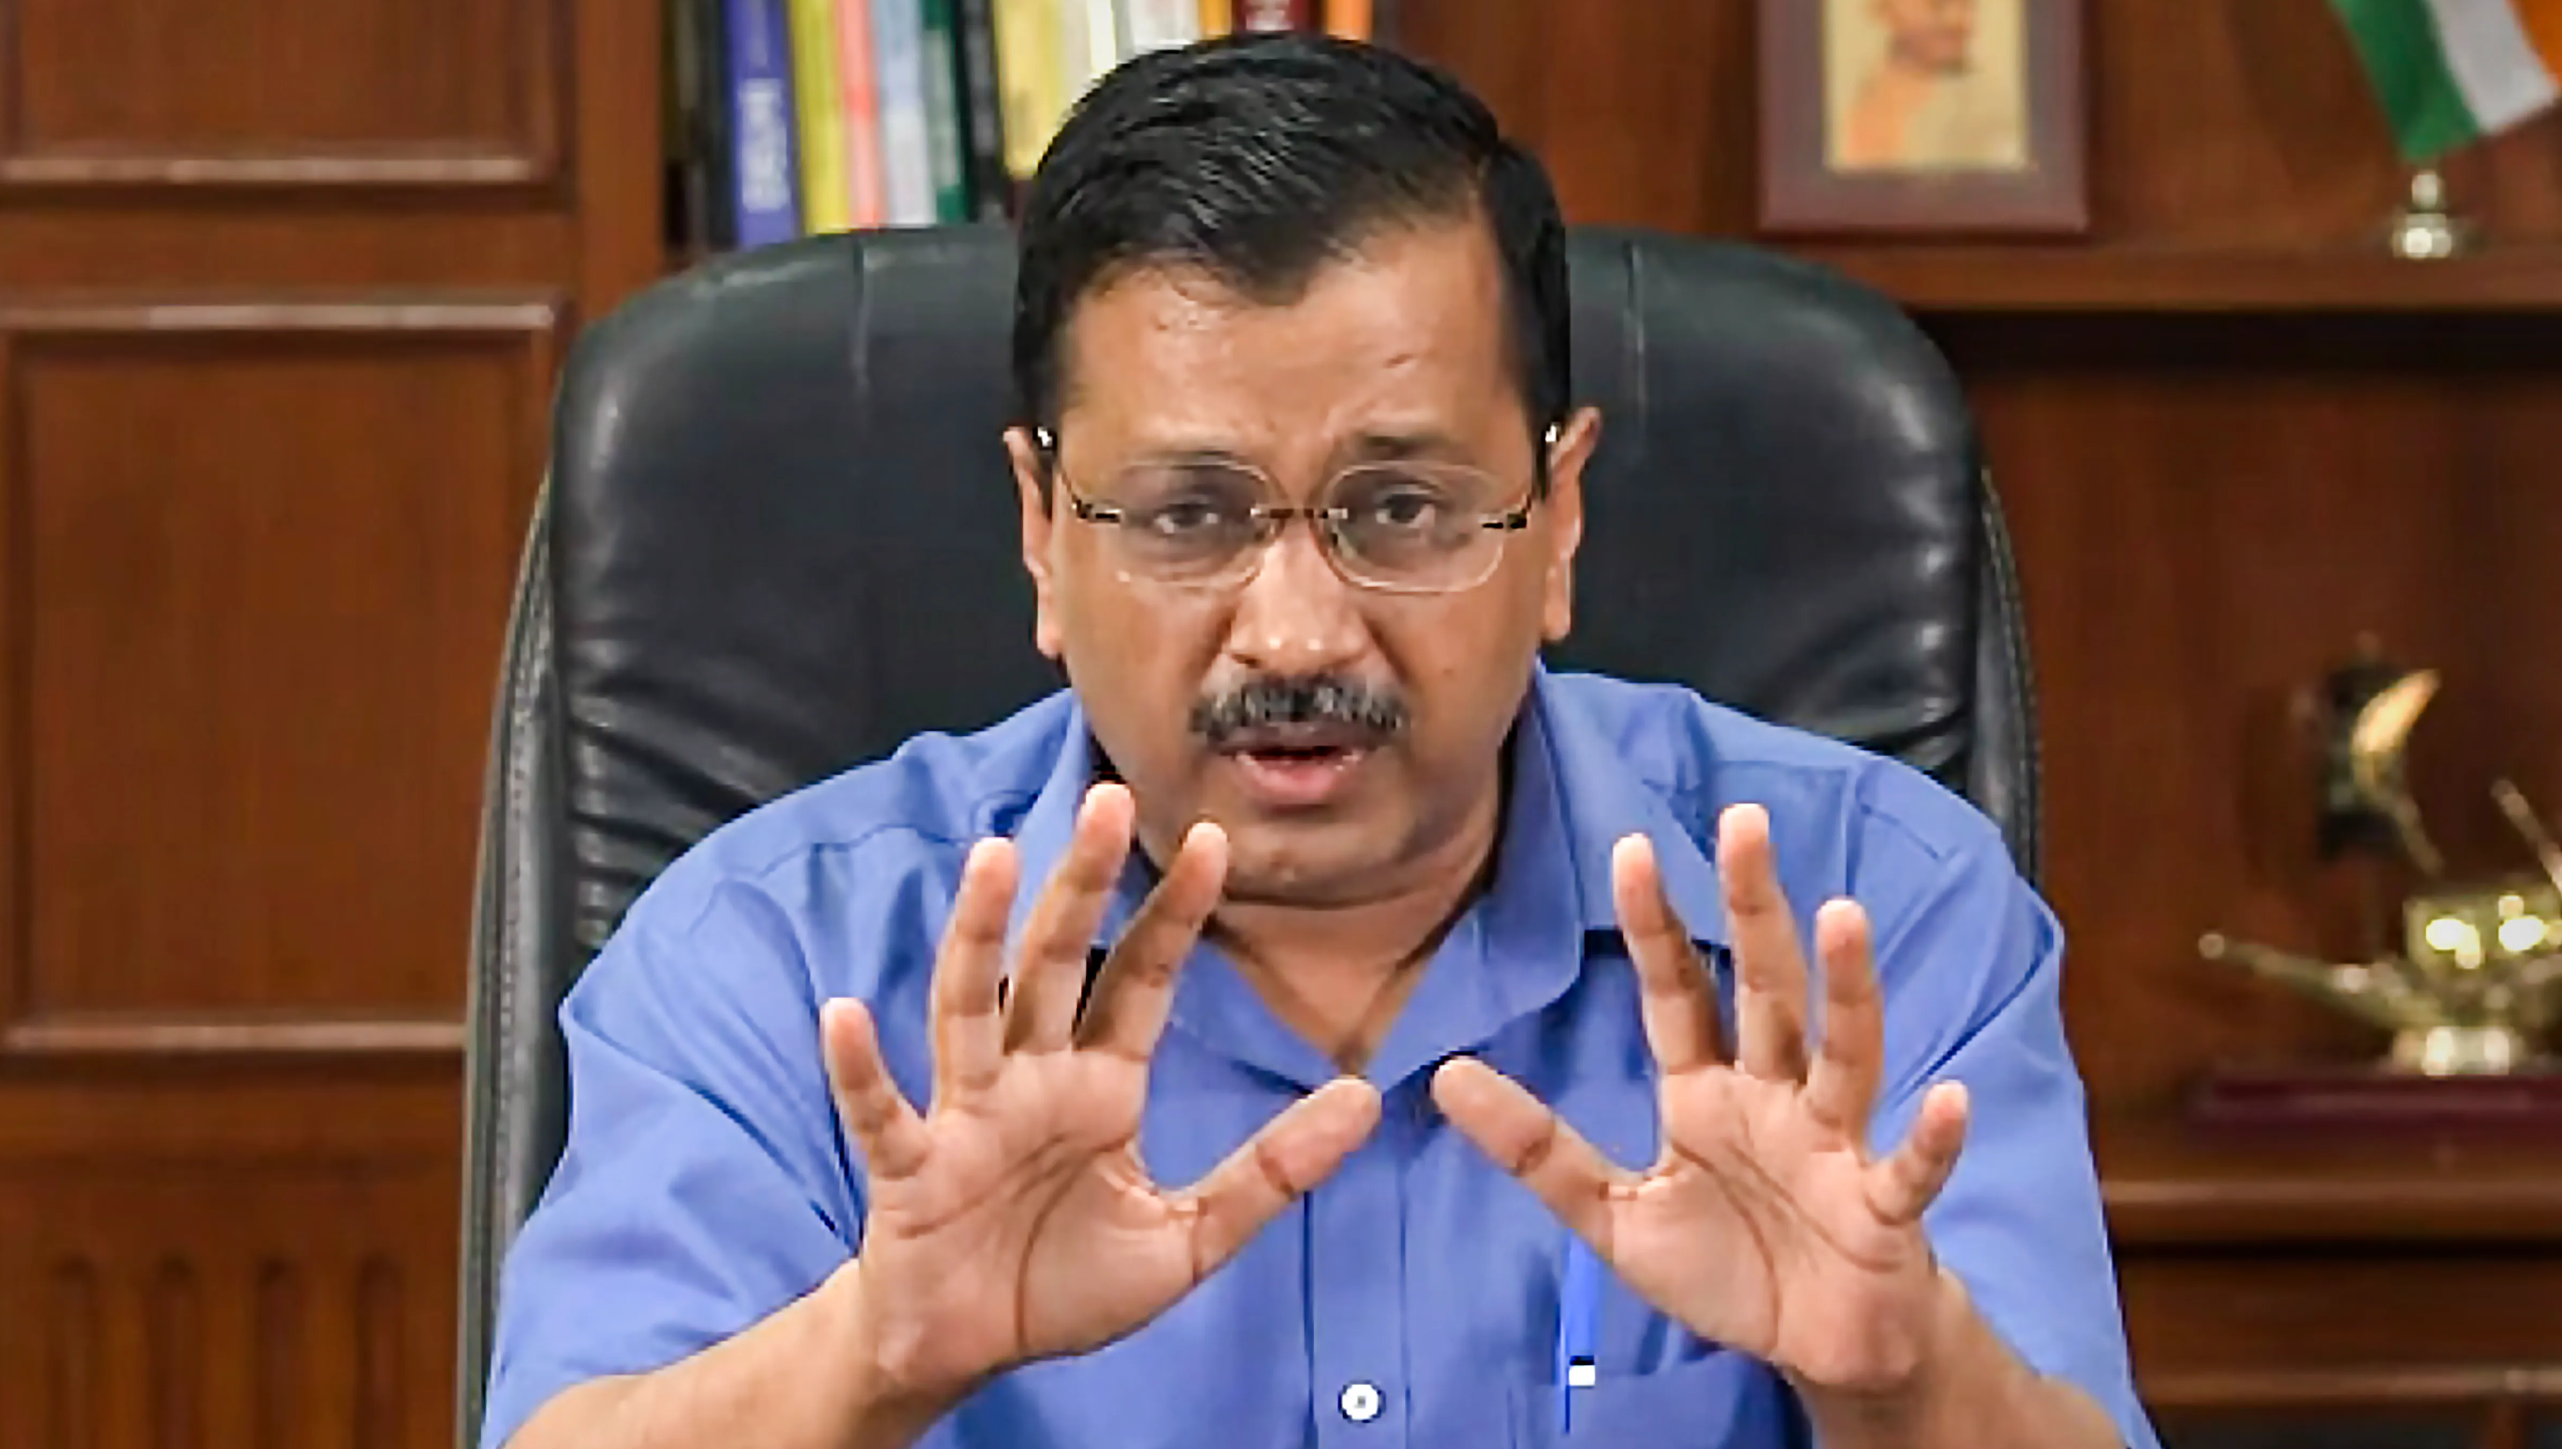 ‘Don’t leave Delhi’: Arvind Kejriwal’s folded hand appeal to migrant workers